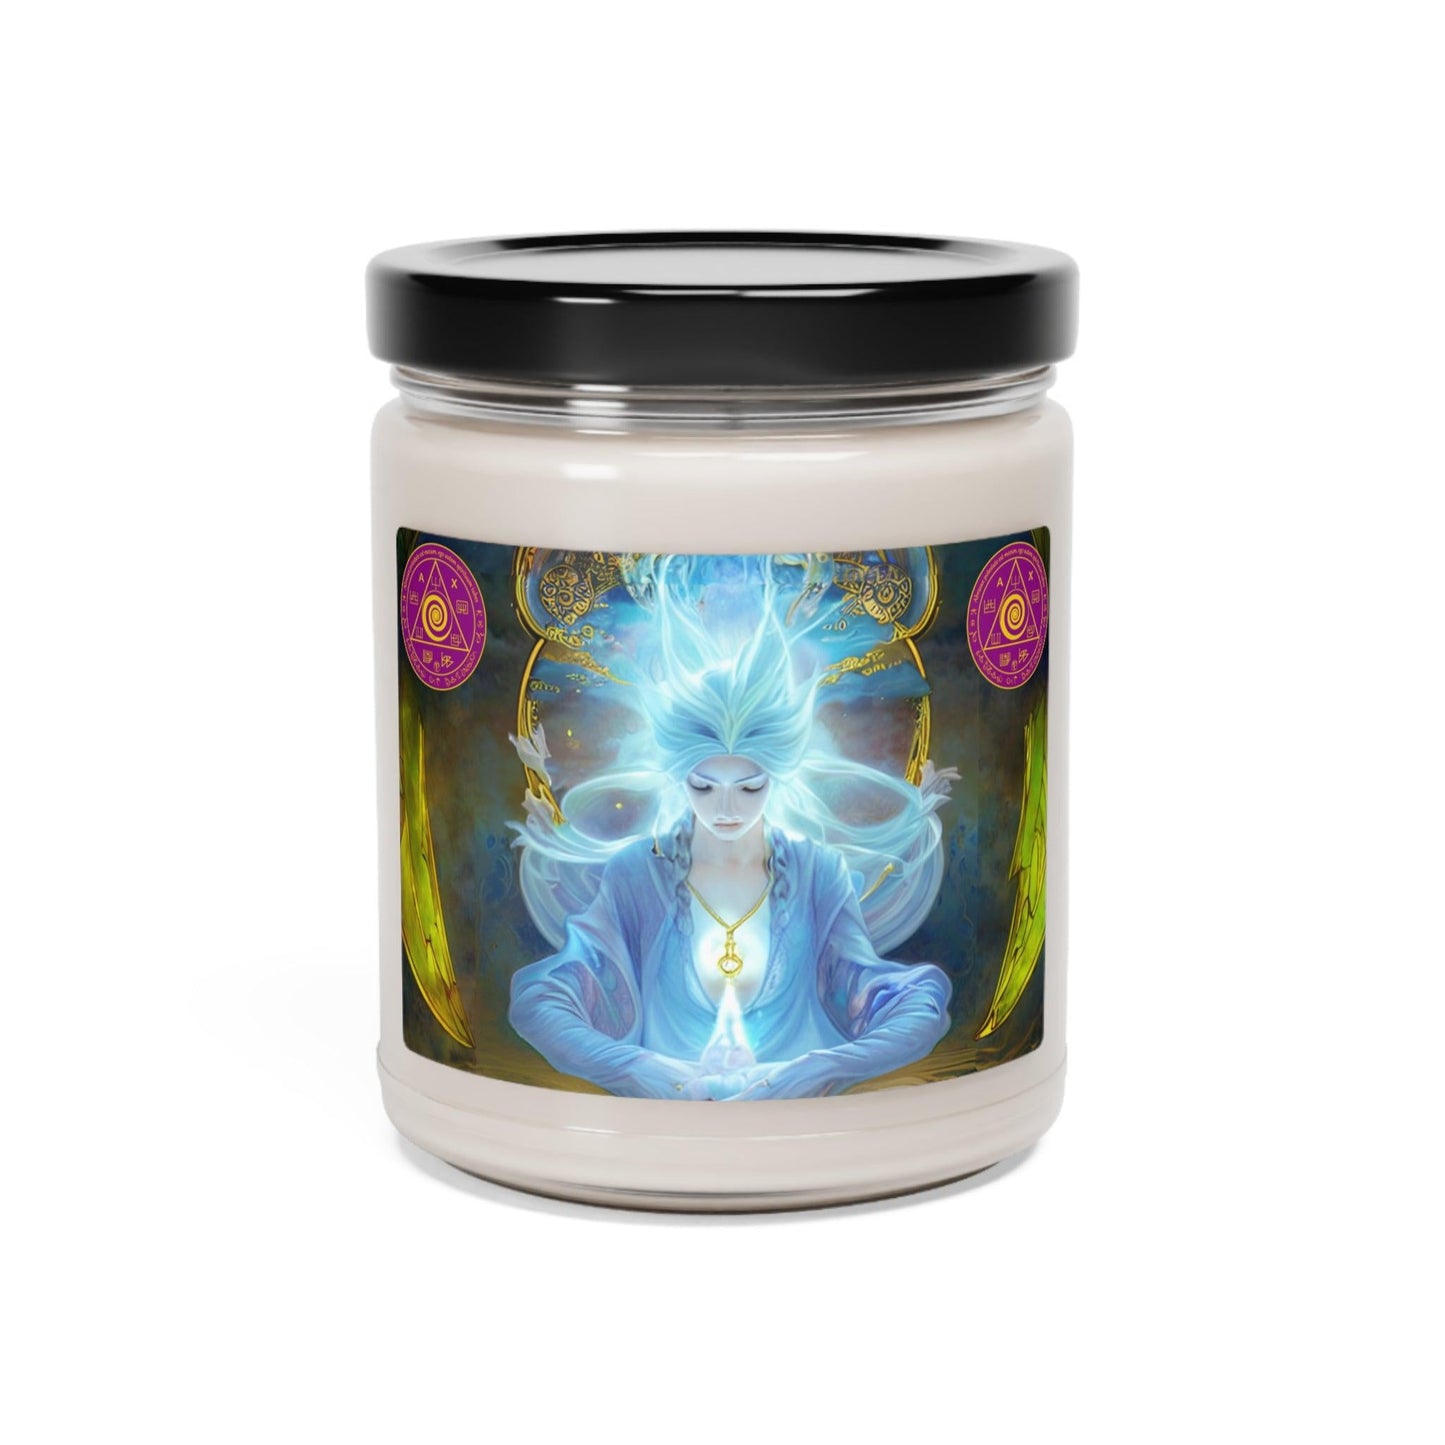 Olympic-Spirits-Cleansing-and-Protection-Scented-Soy-Candle-for-offerings-rituals-initiations-or-praying-and-meditation-21